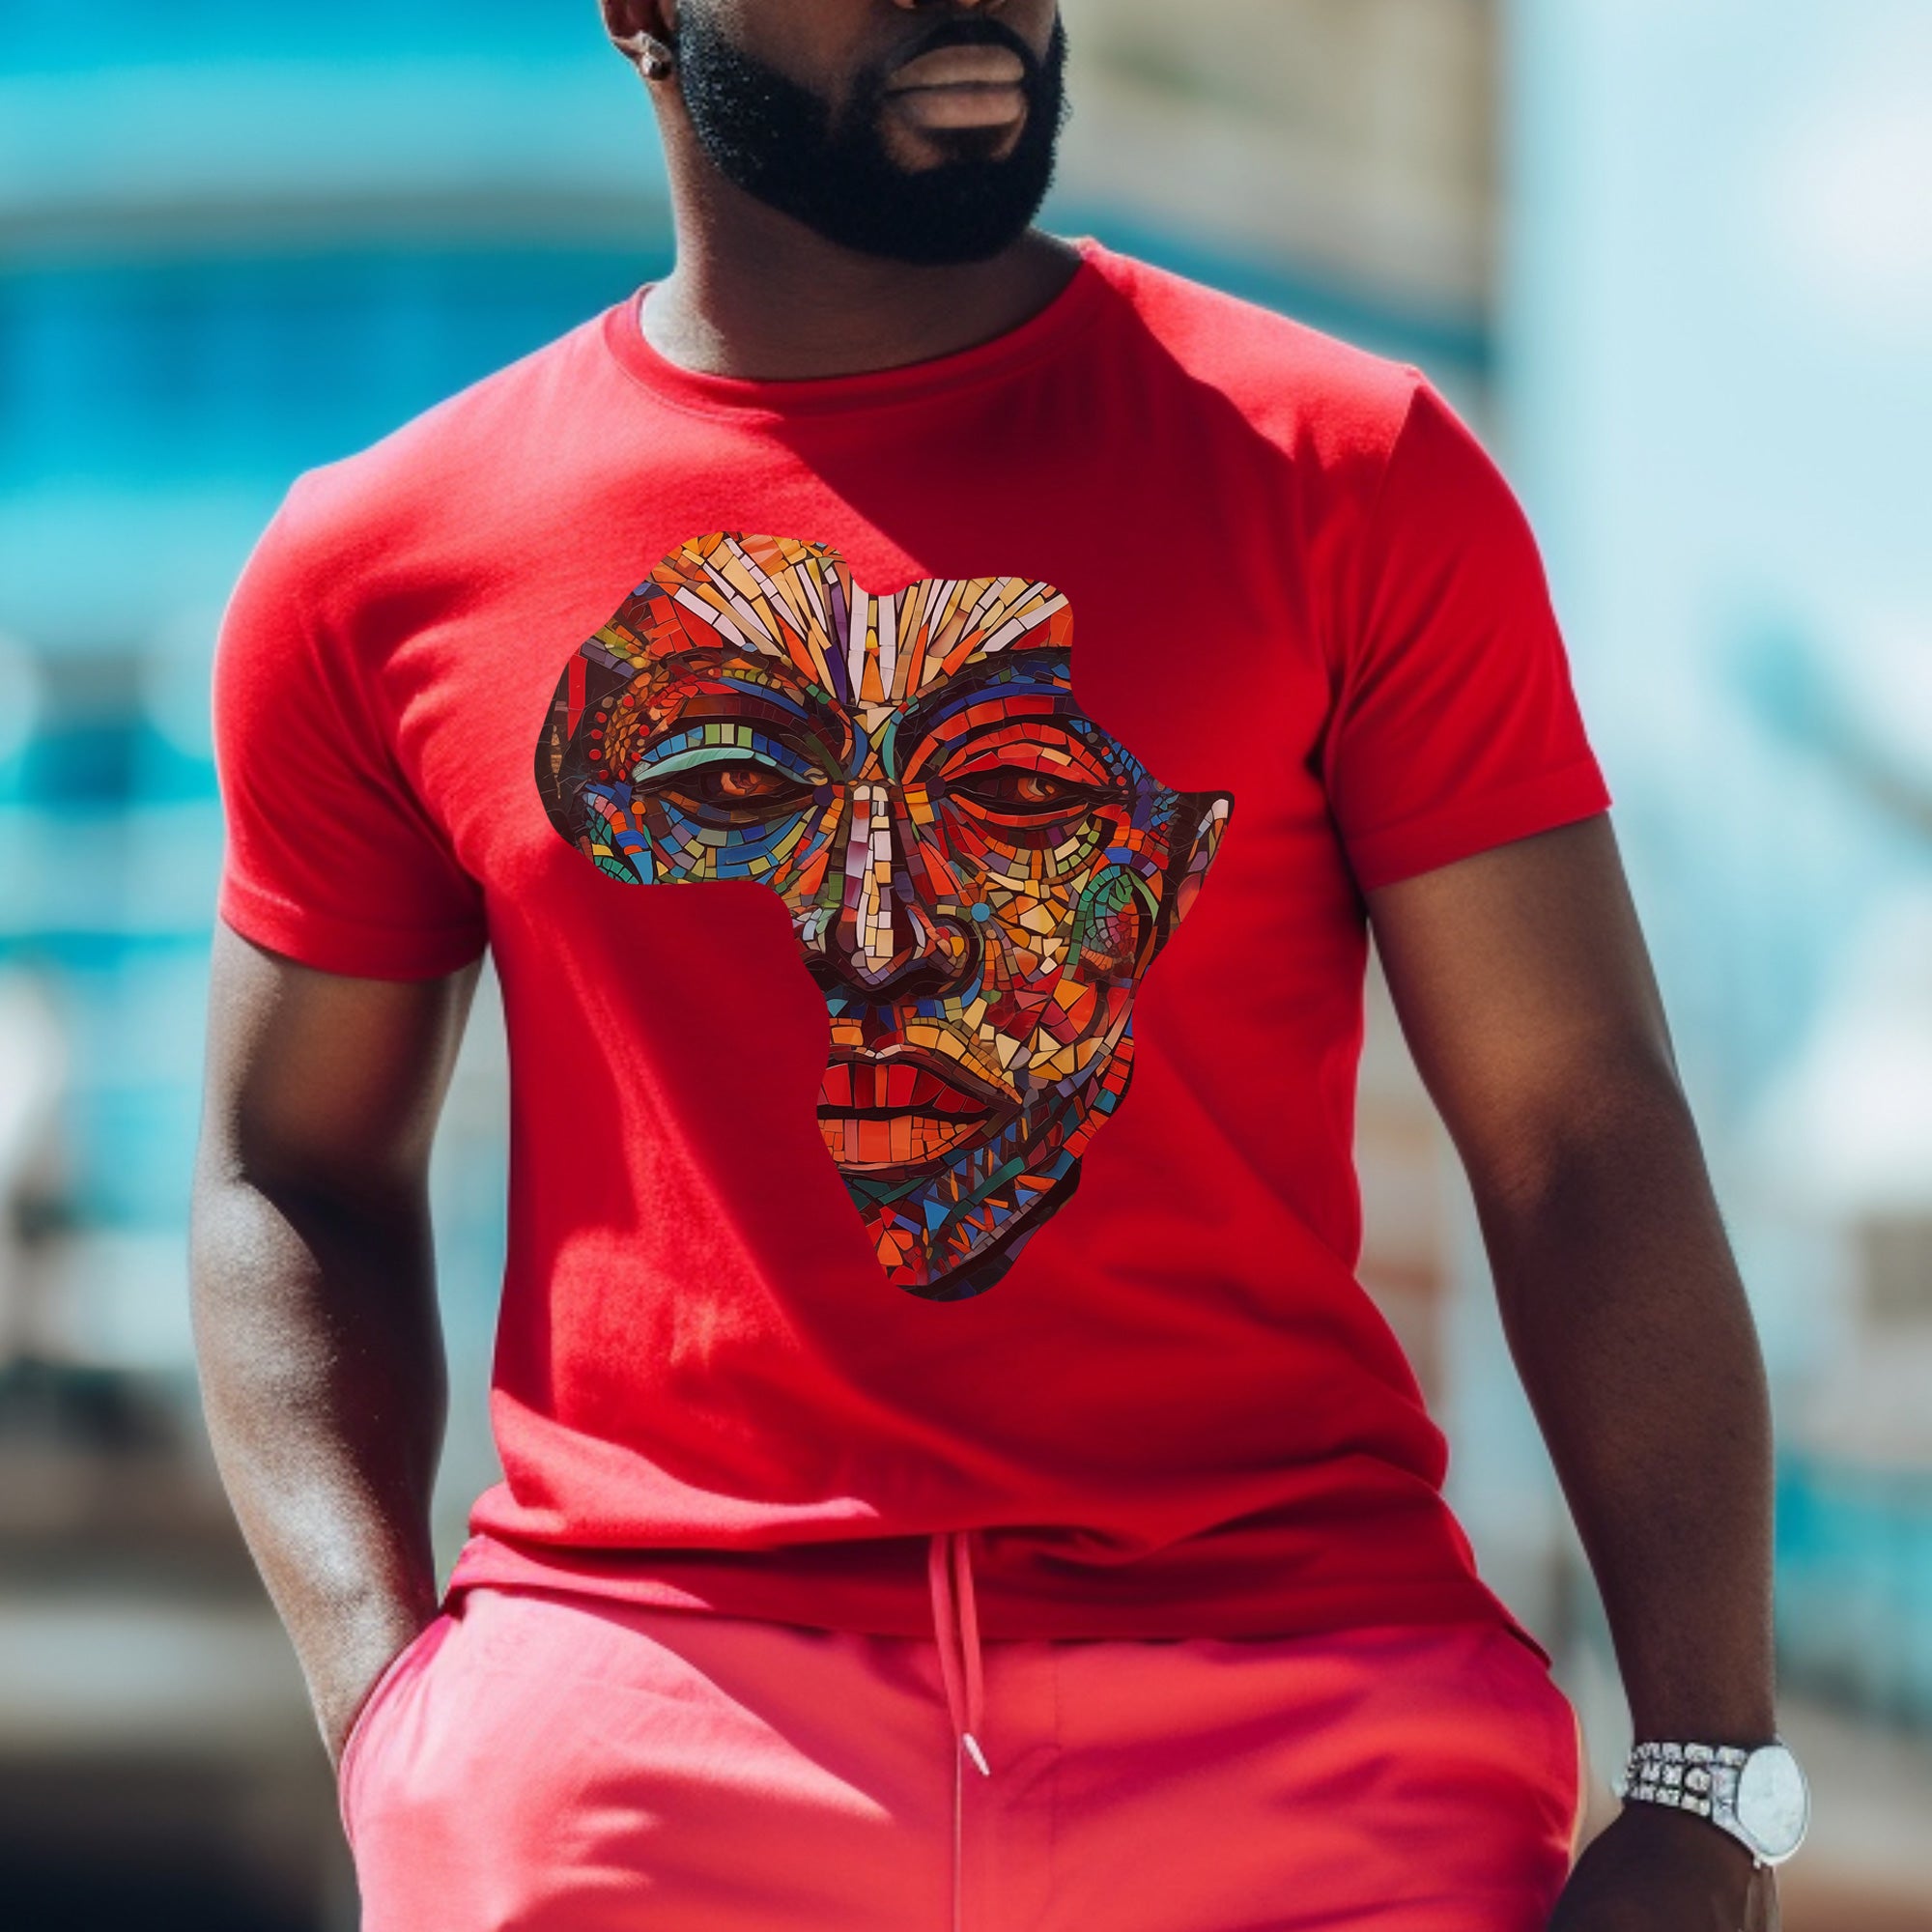 Map of Africa Tee Shirt - Abstract African Mask.